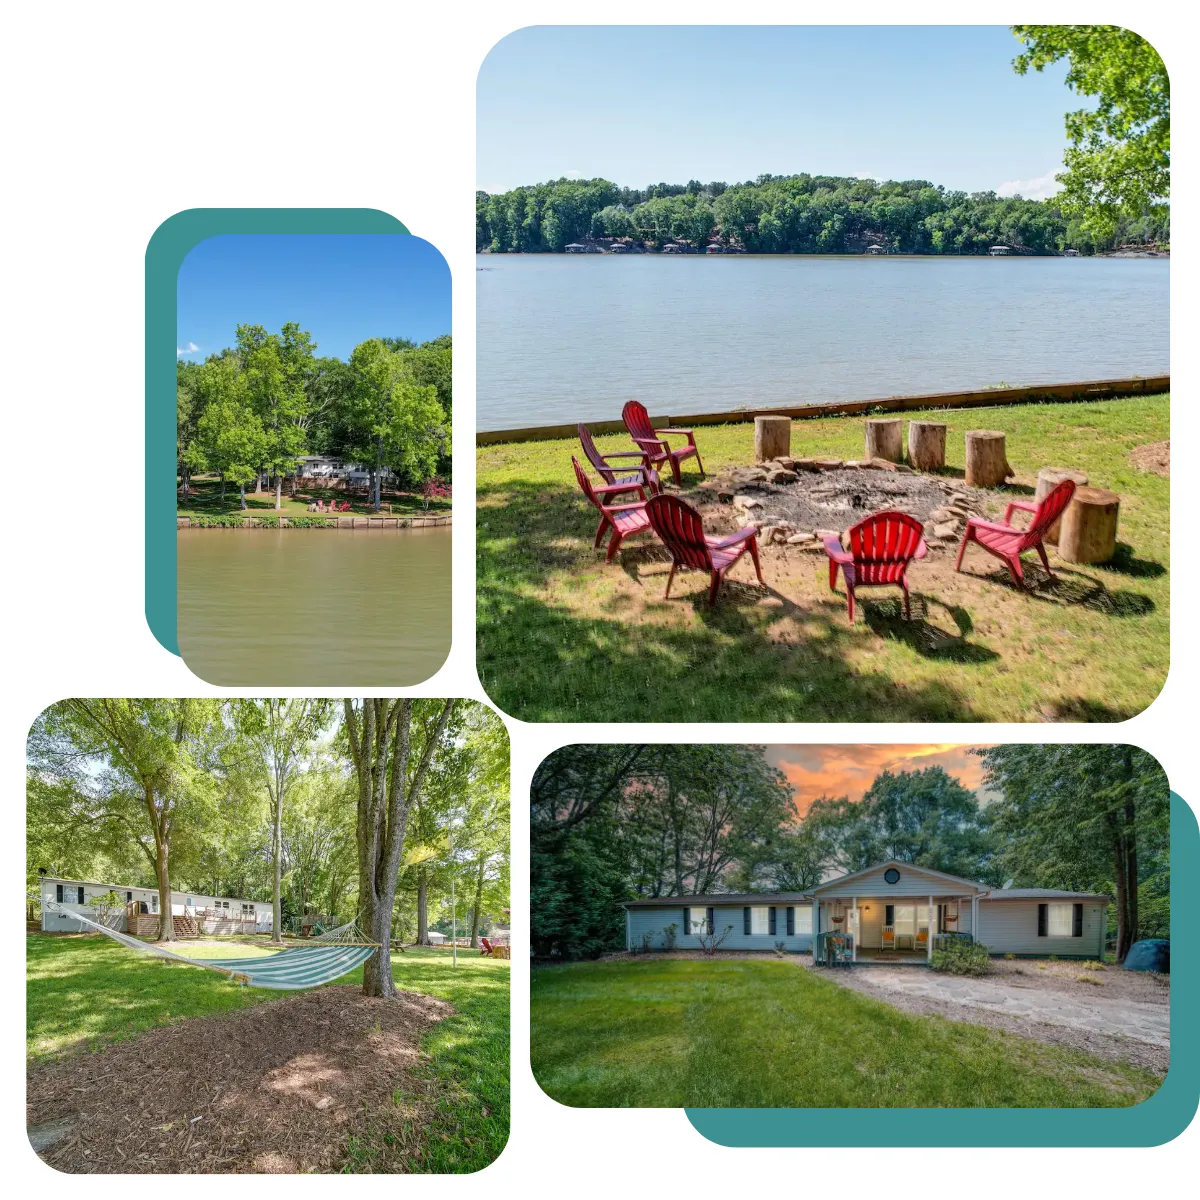 Discover your exclusive Lake Wylie Retreat, a serene haven by the lake with 200+ feet of private shoreline, featuring a beach, fire pit, and hammock. Just 10 minutes from shops and dining, our secluded spot offers peaceful privacy on over an acre of land.